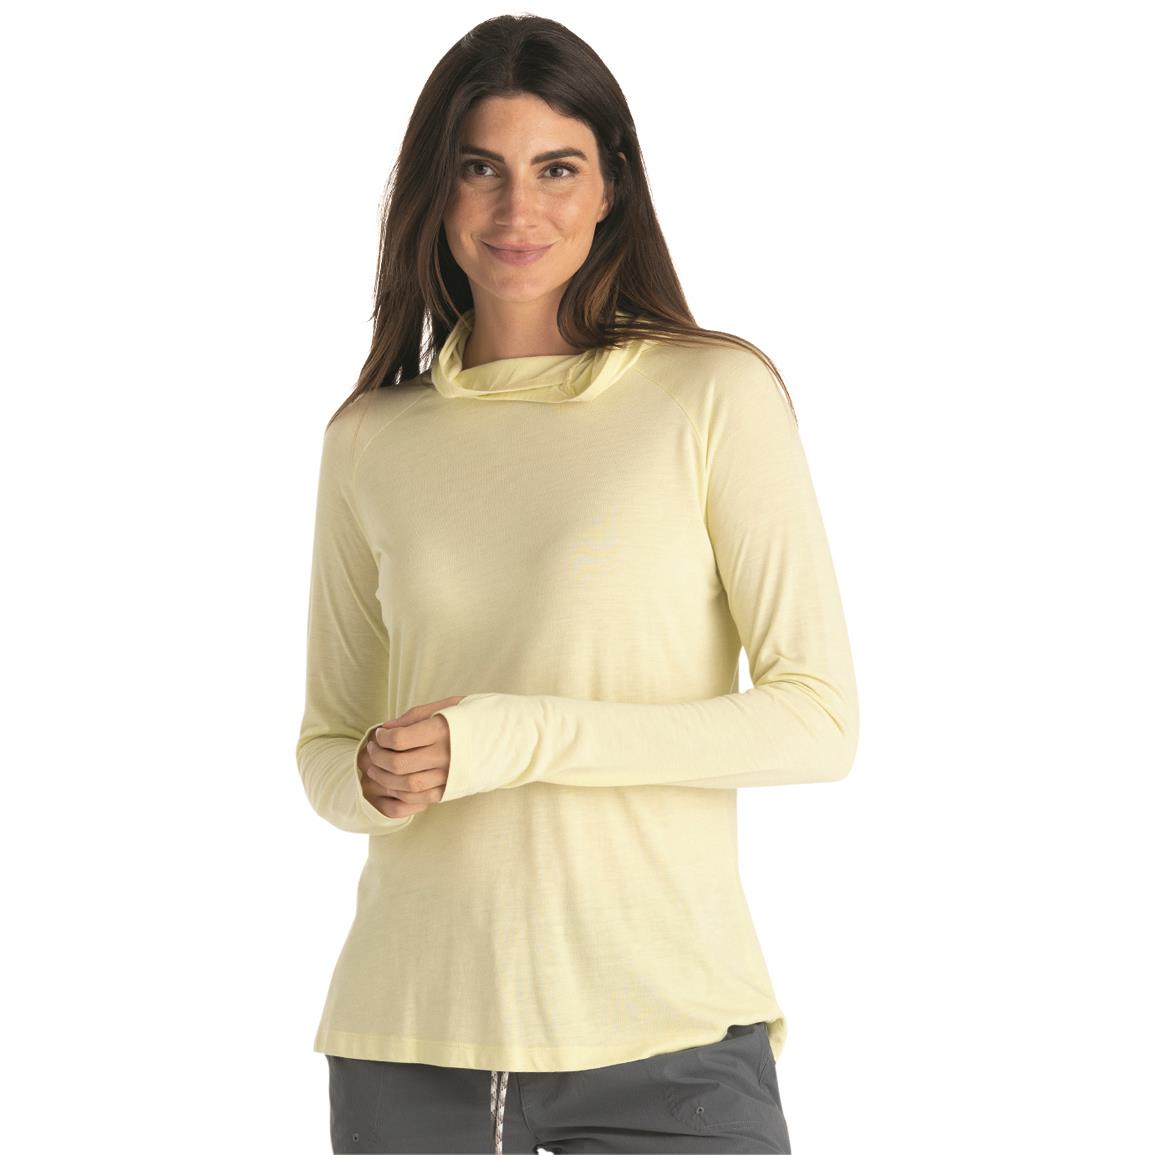 Grundens Women's Solstrale Hoodie - 730287, Shirts & Tops at Sportsman's  Guide